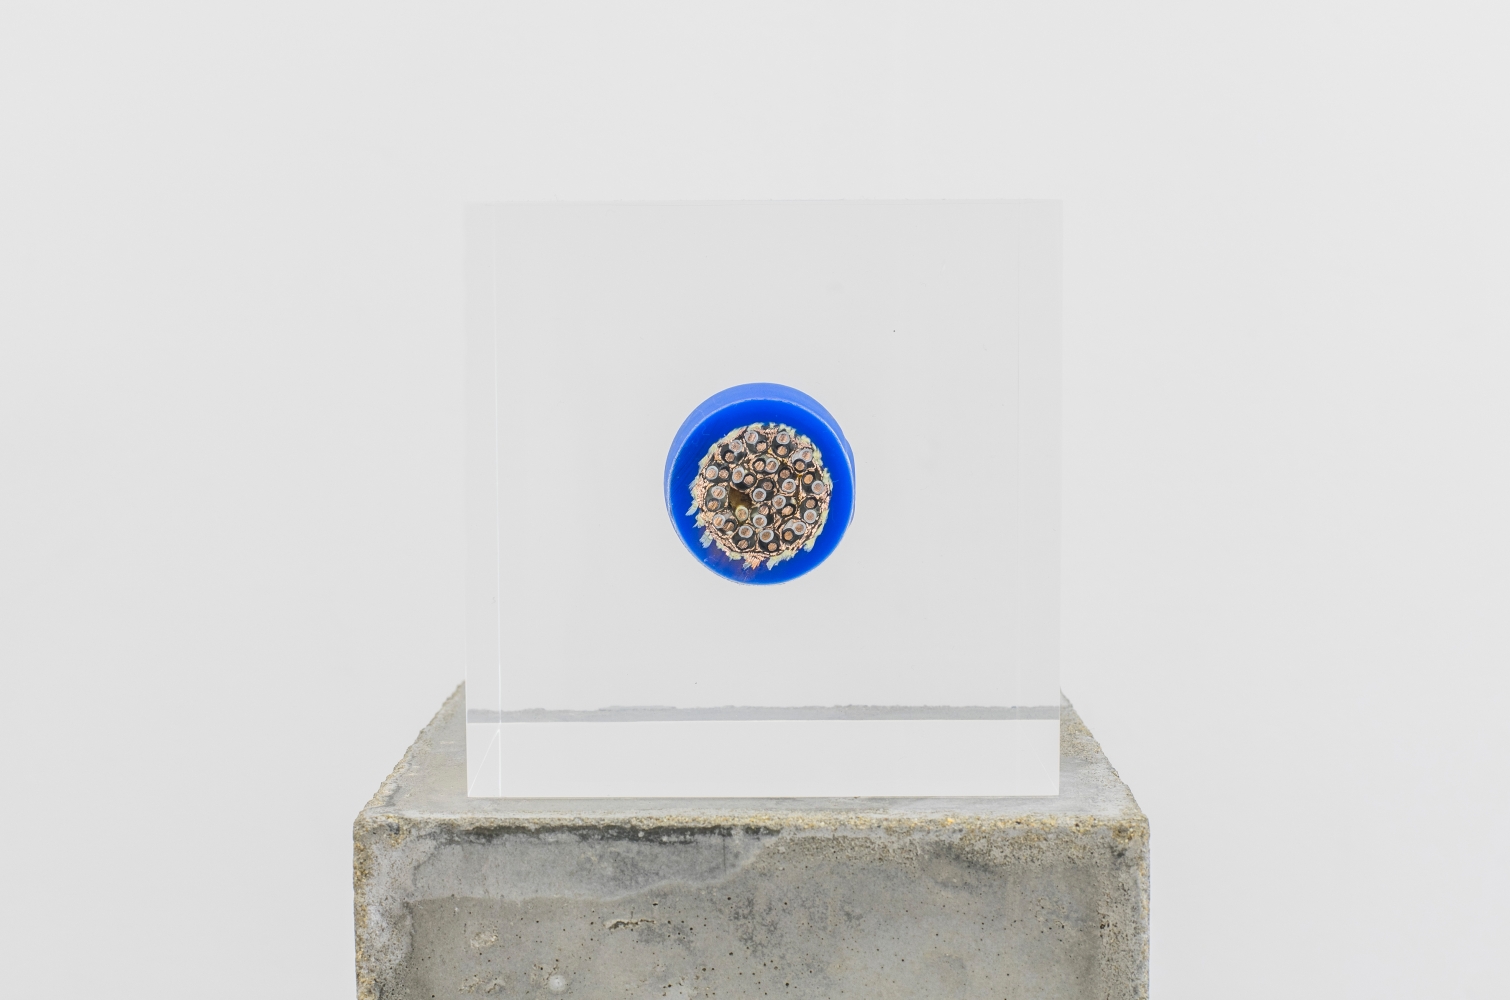 Nina Canell

Brief Syllable (Oceanic)

2016

Subterranean signalling cable, acrylic, concrete

4 x 4 x 4 inches (10 x 10 x 10 cm)

39 3/8 x 5 1/8 x 5 1/8 inches (100 x 13 x 13 cm) pedestal

43 3/8 x 5 1/8 x 5 1/8 inches (110 x 13 x 13 cm) overall

NC 131

&amp;nbsp;

INQUIRE